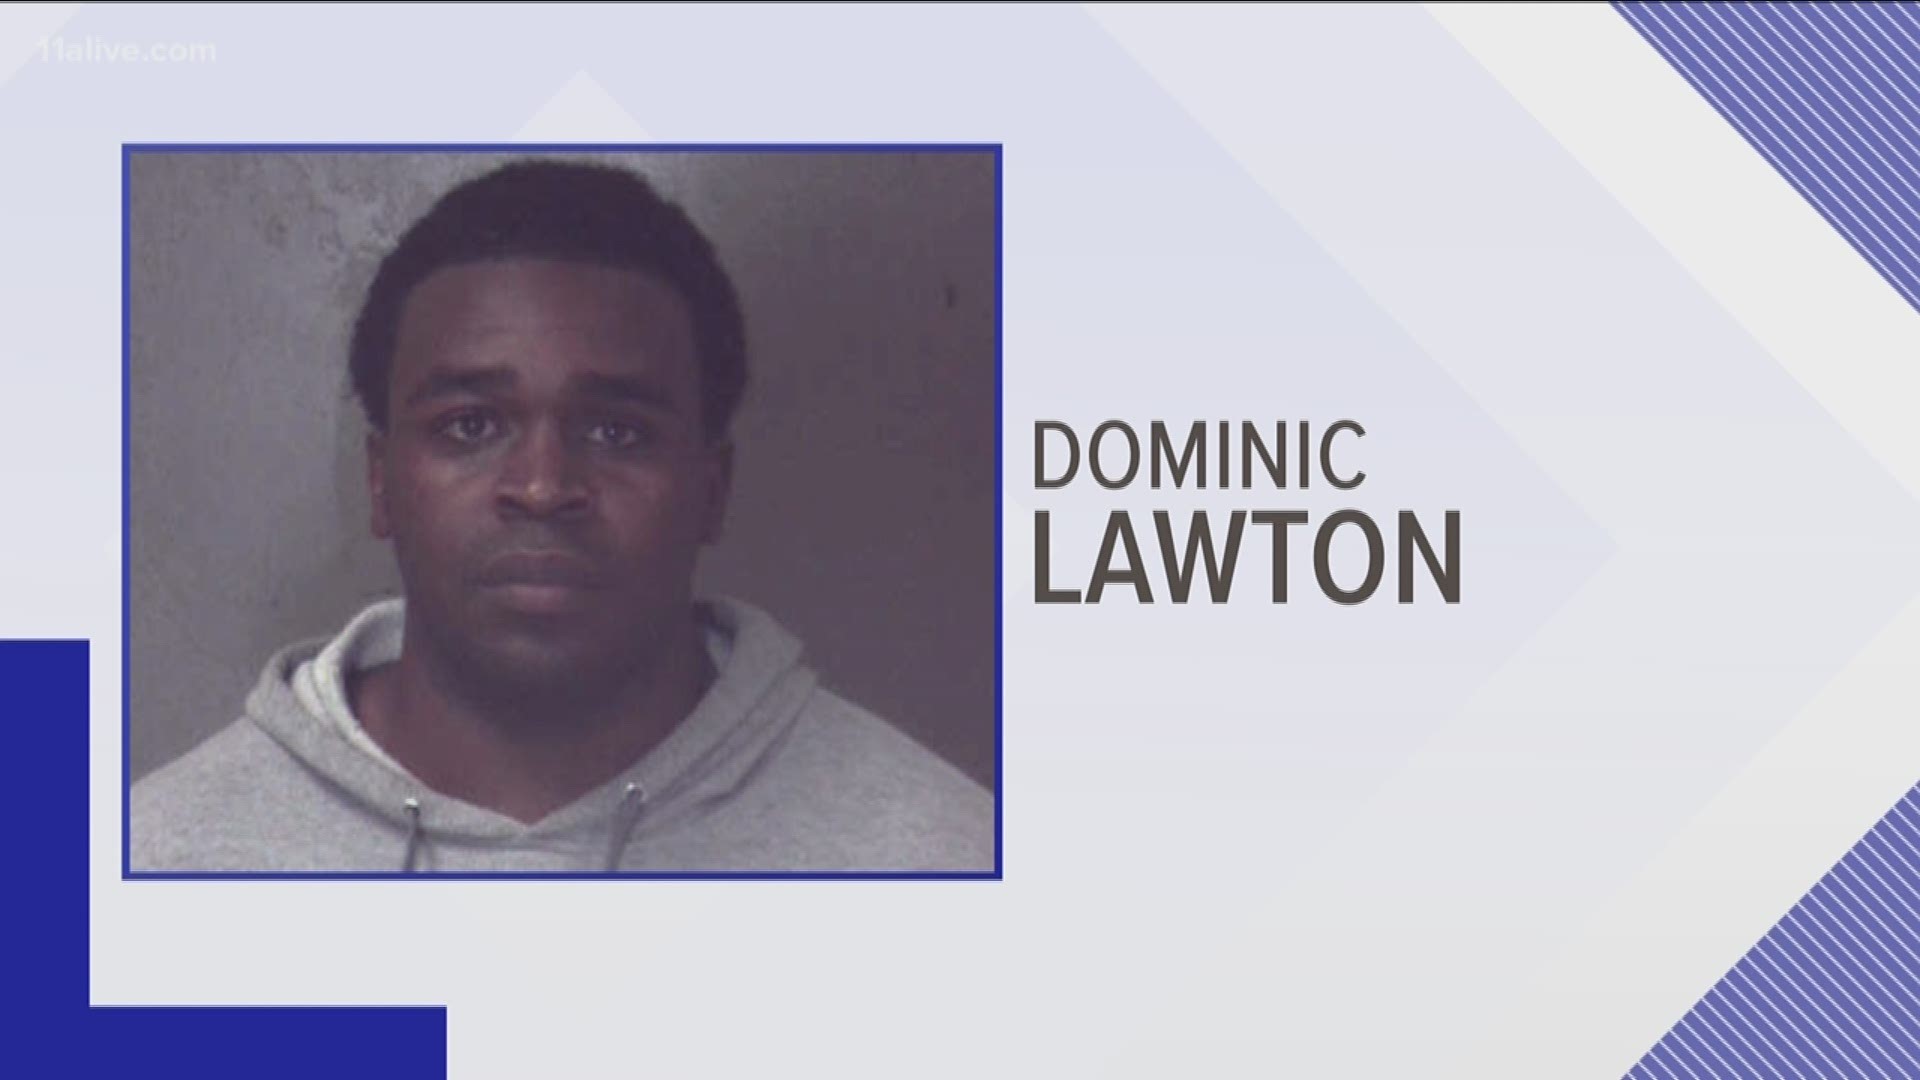 Jurors found 33-year-old Dominic Lawton of Ocilla, Georgia guilty Friday of assaults going back to 2016.